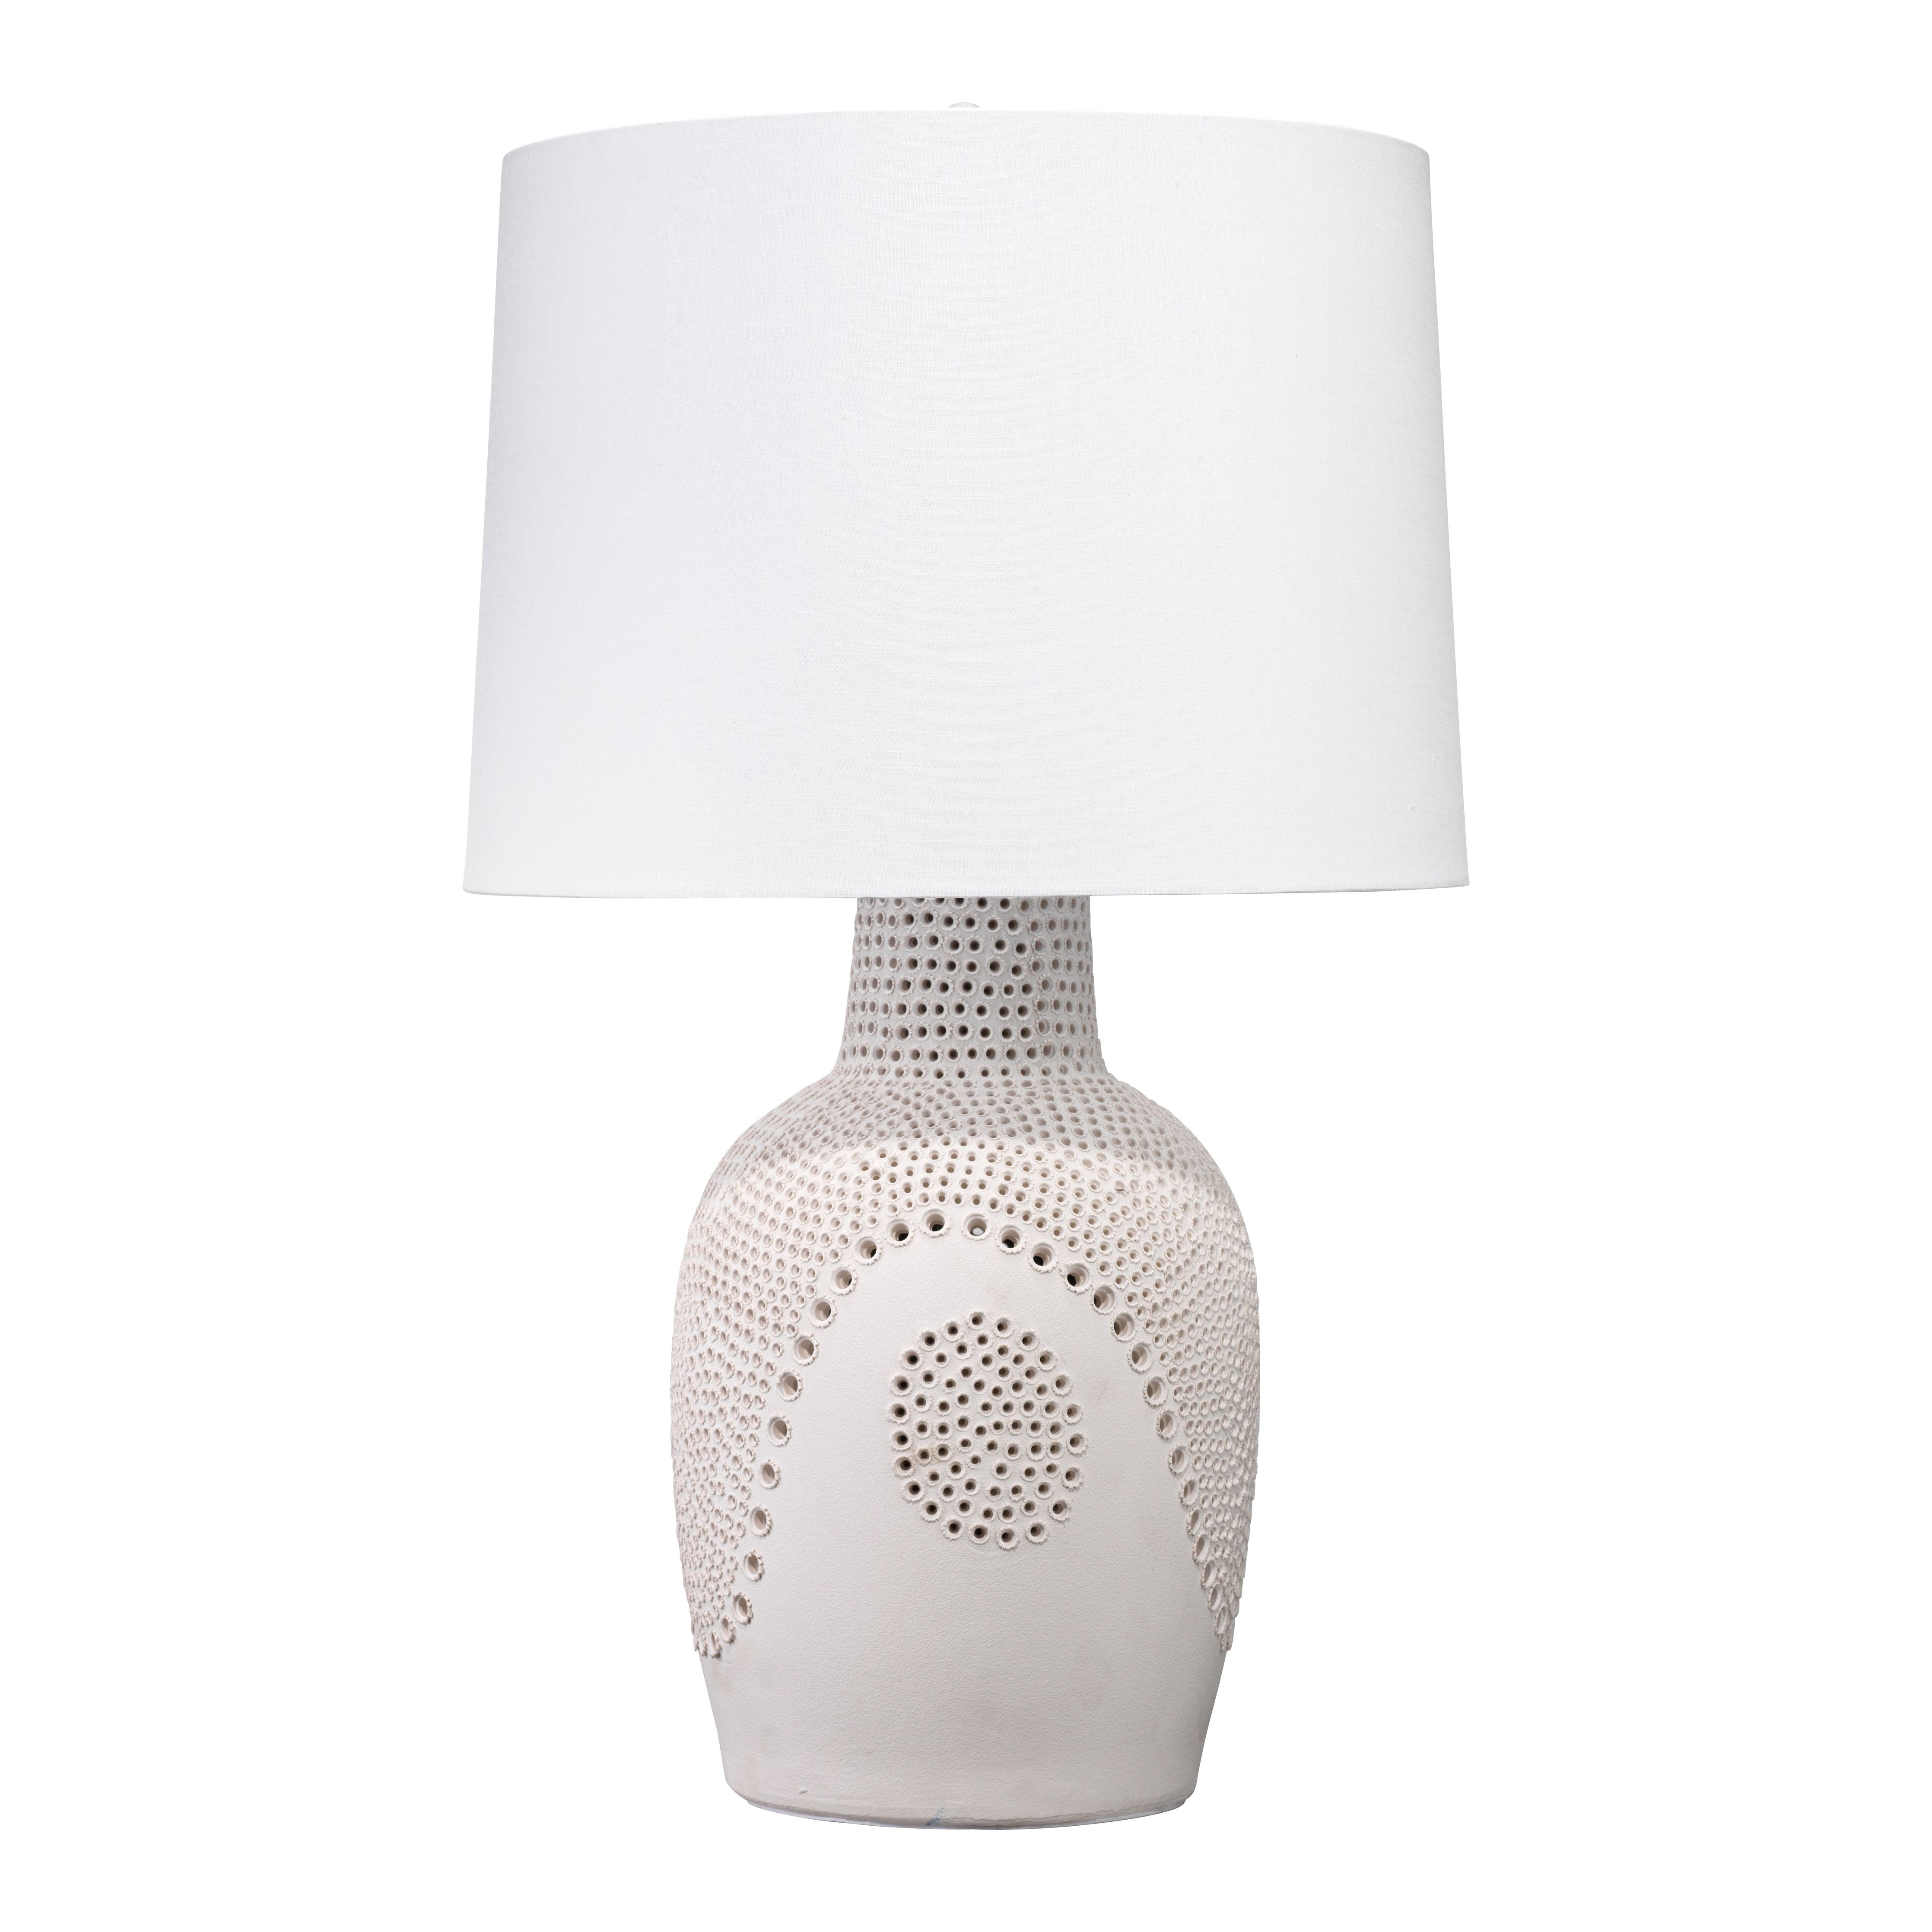 Jamie Young Company - 9MOONTLWH - Moonrise Table Lamp - Moonrise - White